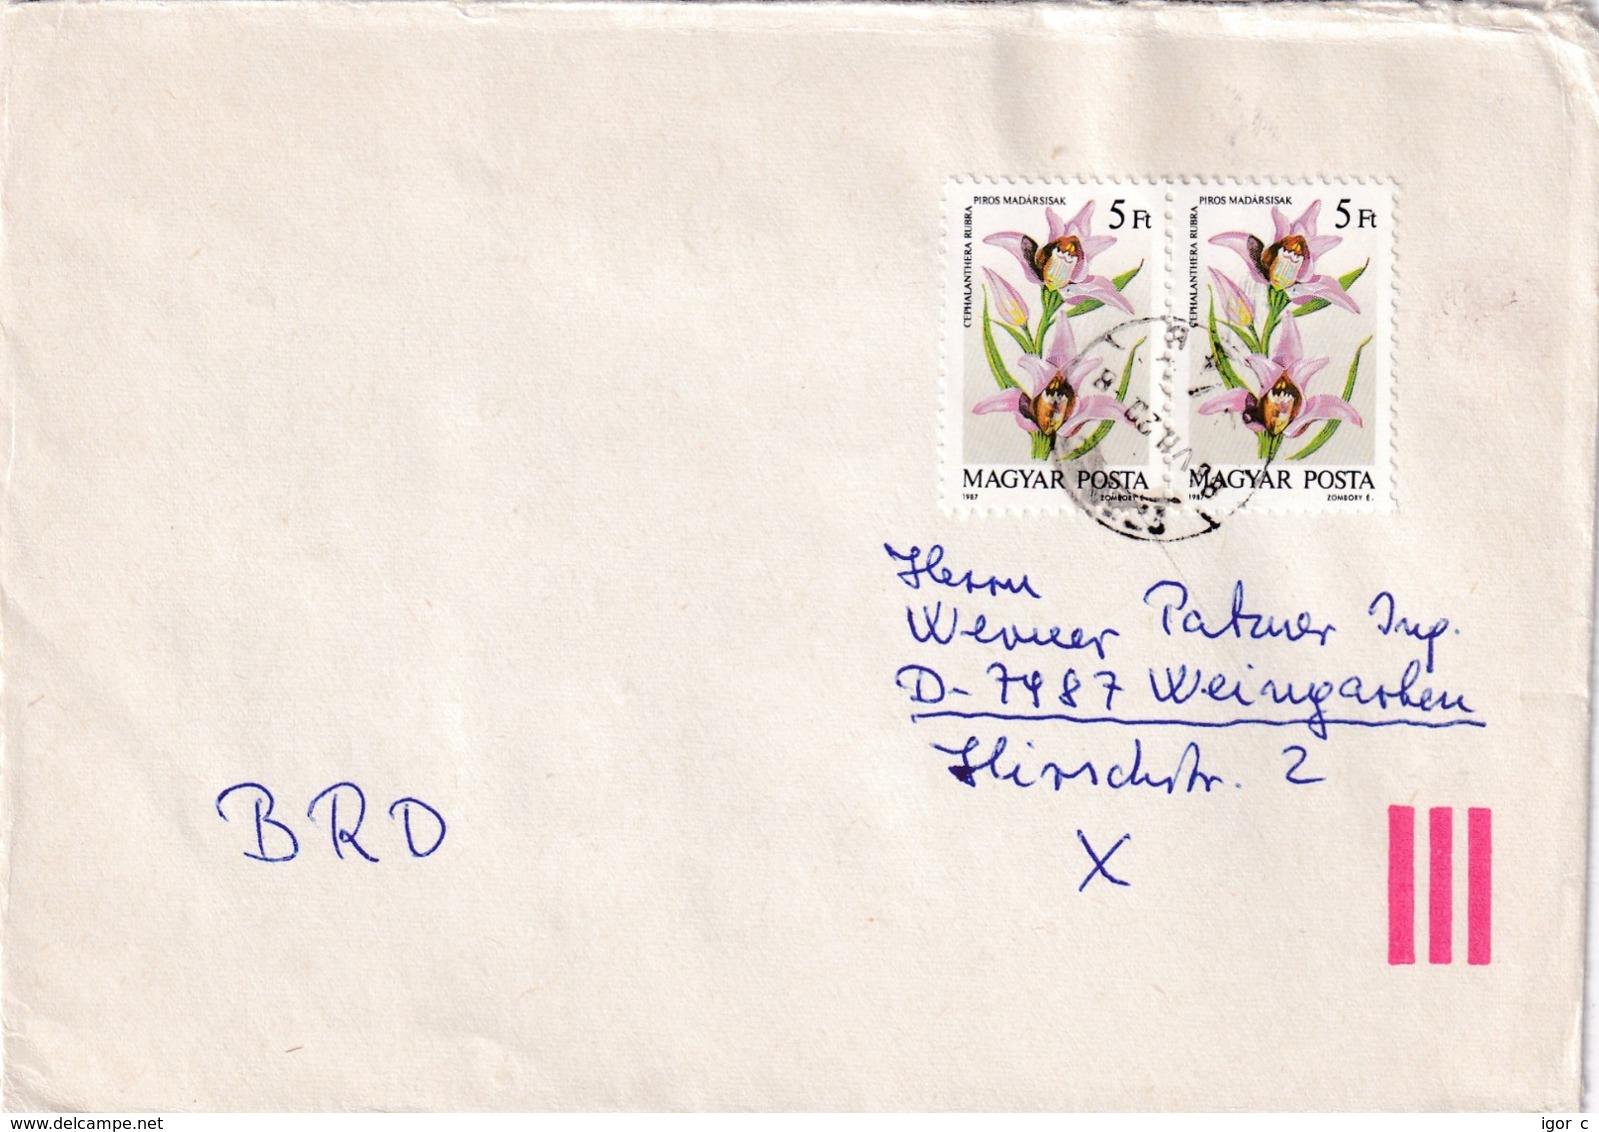 Hungary 1987 Cover To Germany; Flora Flowers; Orchid Orchis Orchidee - Orchideen